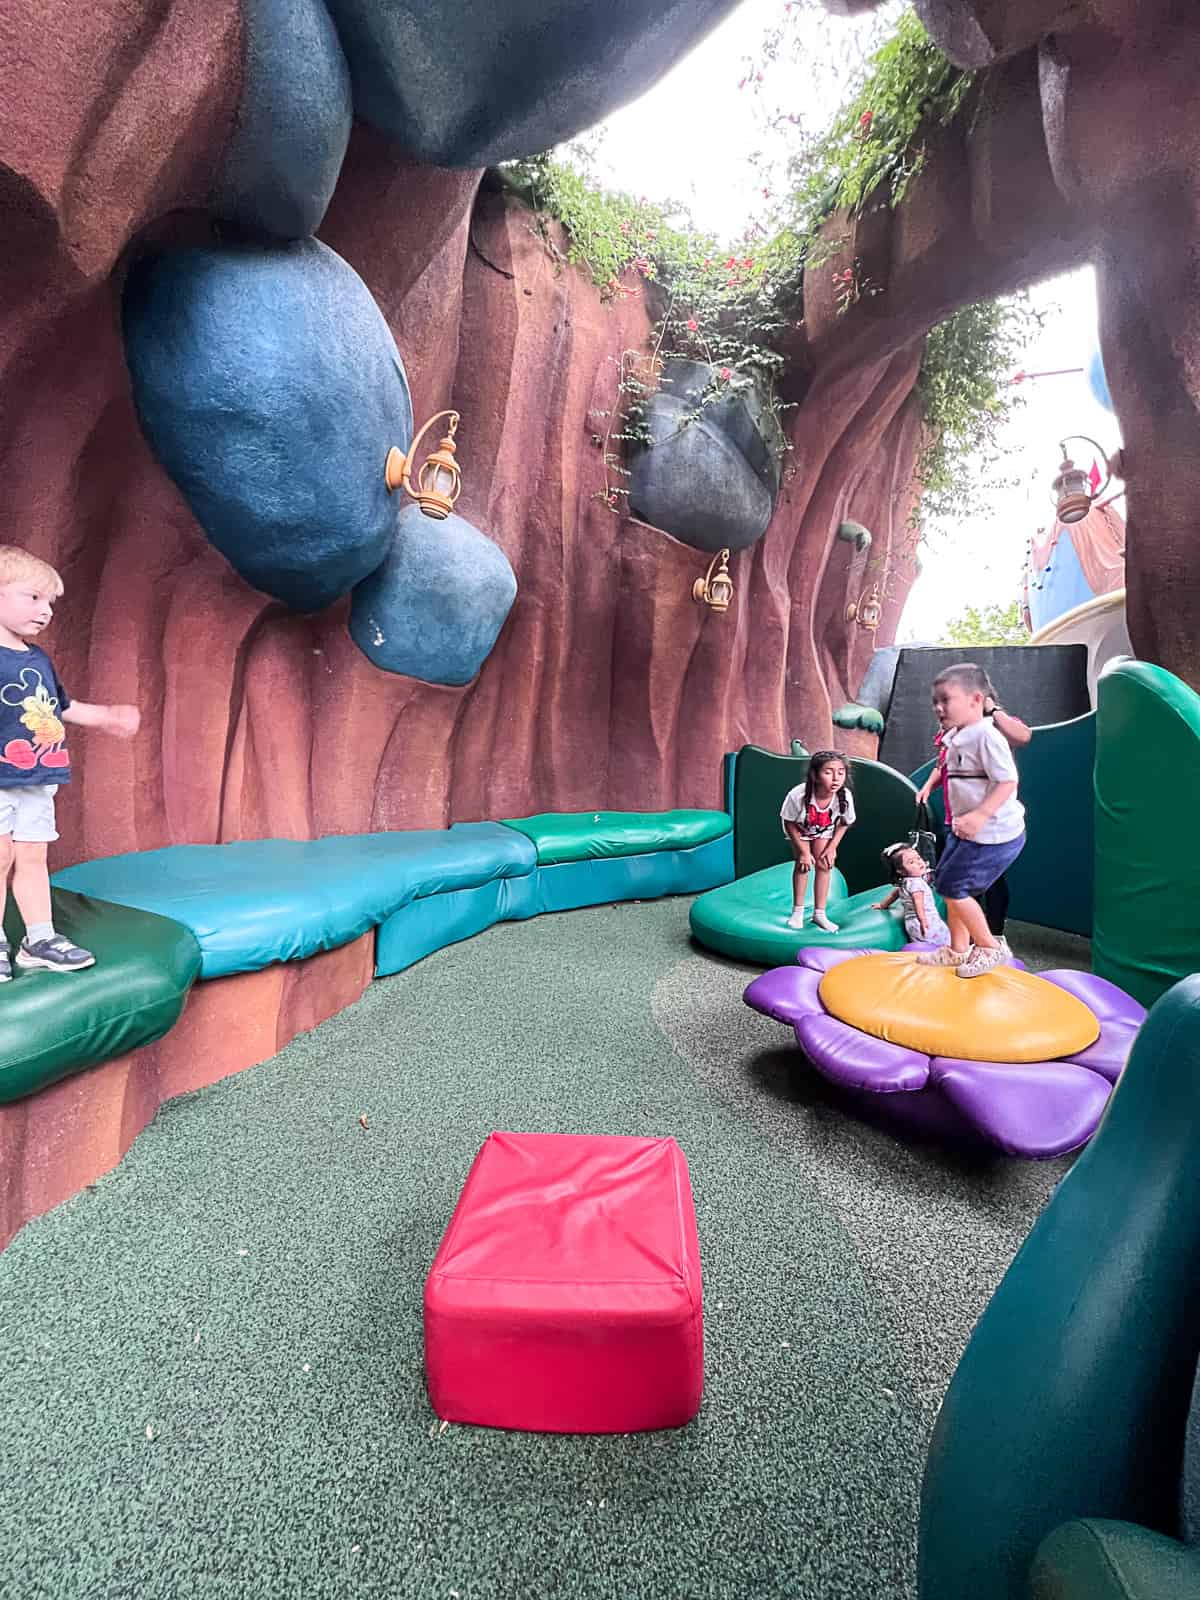 Small children play area in Mickey's Toontown at Disneyland Park Anaheim